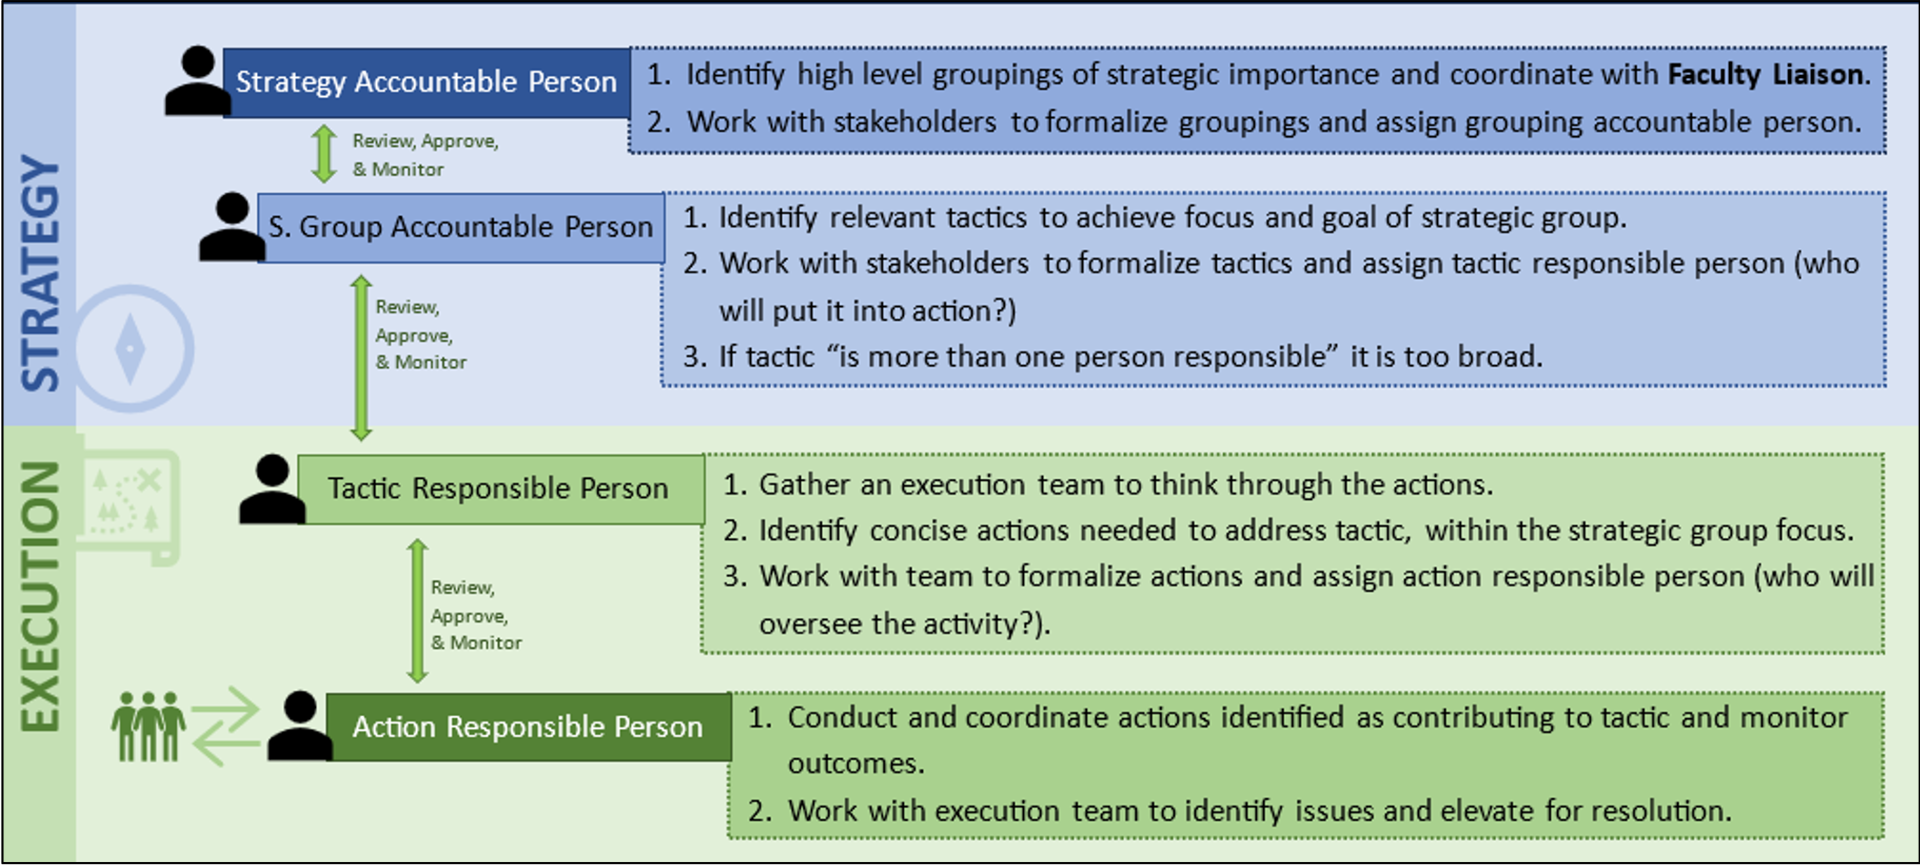 [Icon of a Compass] Strategy Strategy Accountable Person 1. Identify high-level groupings of strategic importance and coordinate with facutly liason. 2. Work with stakeholders to formalize groupings and assign grouping accountable person. (Review, Approve, & Monitor) Strategic Group Accountable Person 1. Identify relevant tactics to achieve focus and goal of strategic group. 2. Work with stakeholders to formalize tactics and assign tactic responsible person (who will put it into action?) 3. If the tactic is more than one person responsible, it is too broad. (Review, Approve, & Monitor) [Icon of a navigation map] Execution Tactic Responsible Person 1. Gather an execution team to think through the actions. 2. Identify concise actions needed to address tactic, within the strategic group focus. 3. Work with team to formalize actions and assign action responsible person (who will oversee the activity?). (Review, Approve, & Monitor) Action Responsible Person 1. Conduct and coordinate actions identified as contributing to tactic and monitor outcomes. 2. Work with execution team to identify issues and elevate for resolution. [Illustration of action responsible person working collaboratively with a team of people.]